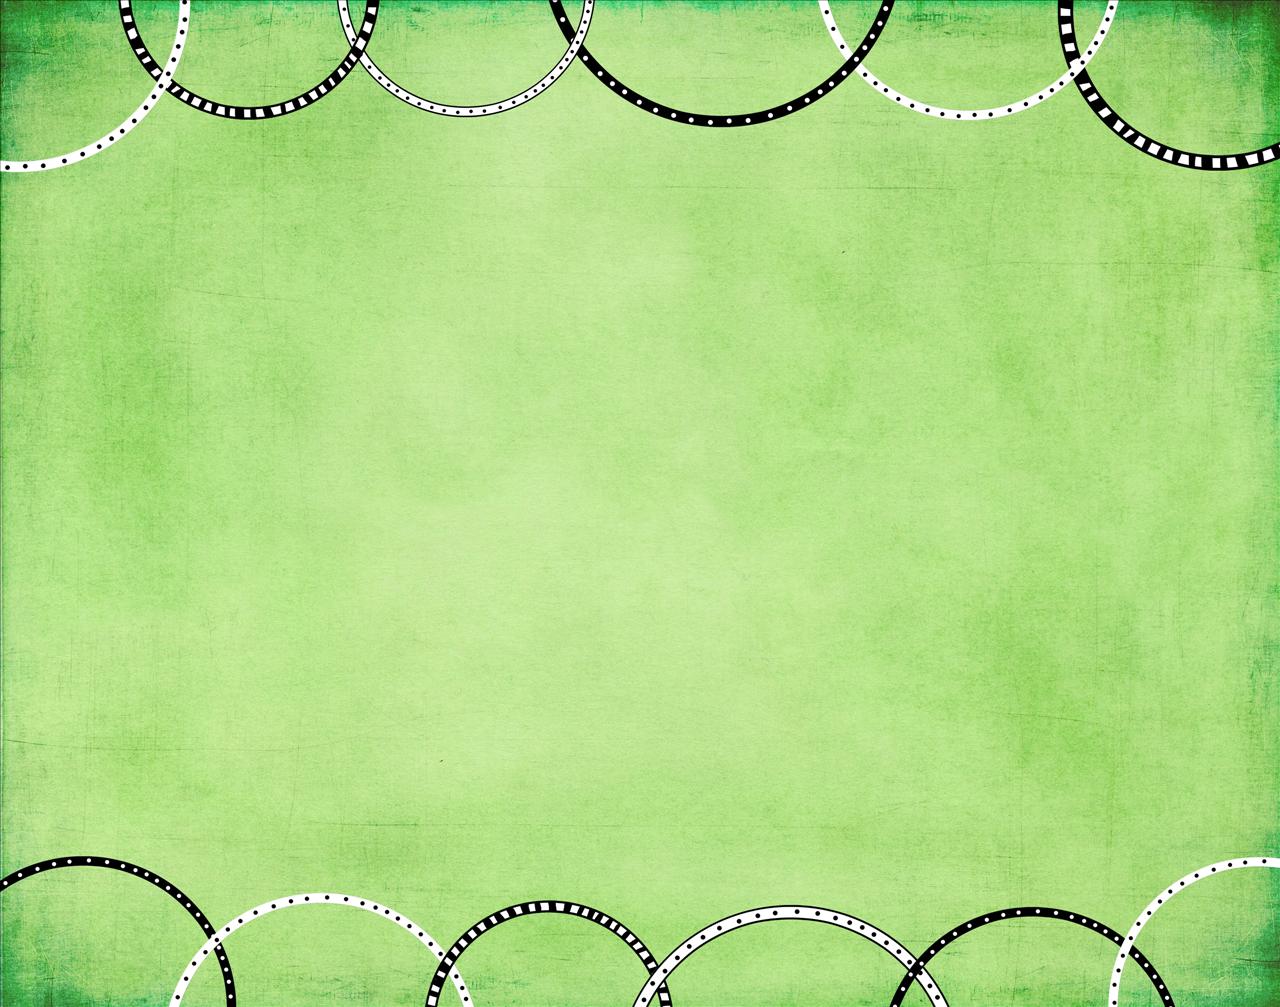 Green with Rings Backgrounds powerpoint backgrounds